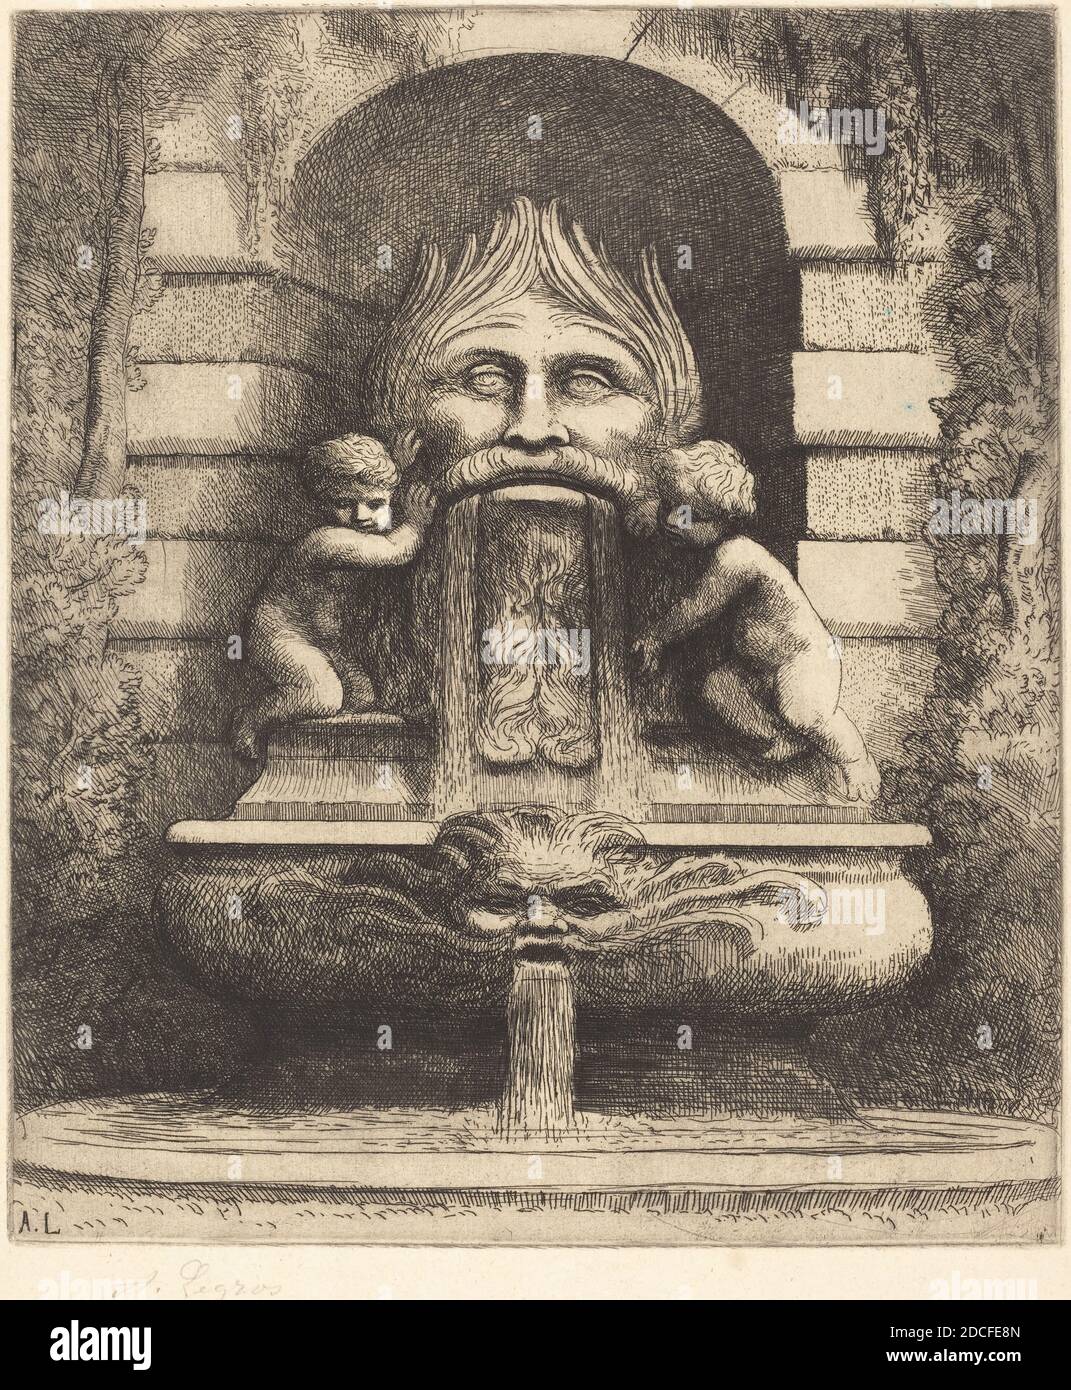 Alphonse Legros, (artist), French, 1837 - 1911, Fountain: Grotesque, Children and Basin (Une fountaine: Masque, enfants et bassin), etching Stock Photo